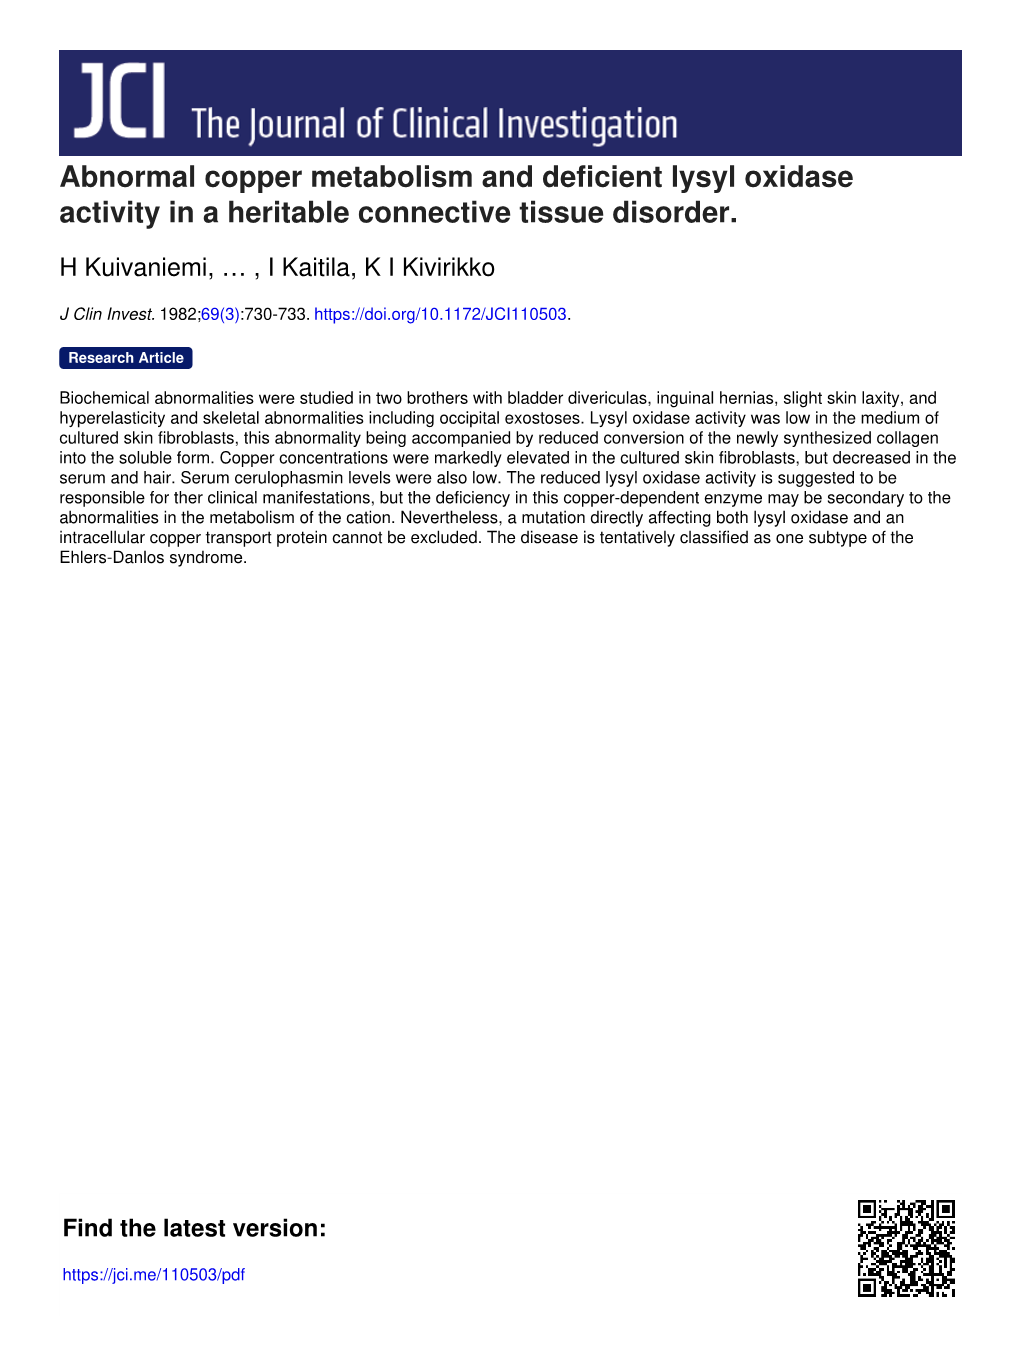 Abnormal Copper Metabolism and Deficient Lysyl Oxidase Activity in a Heritable Connective Tissue Disorder